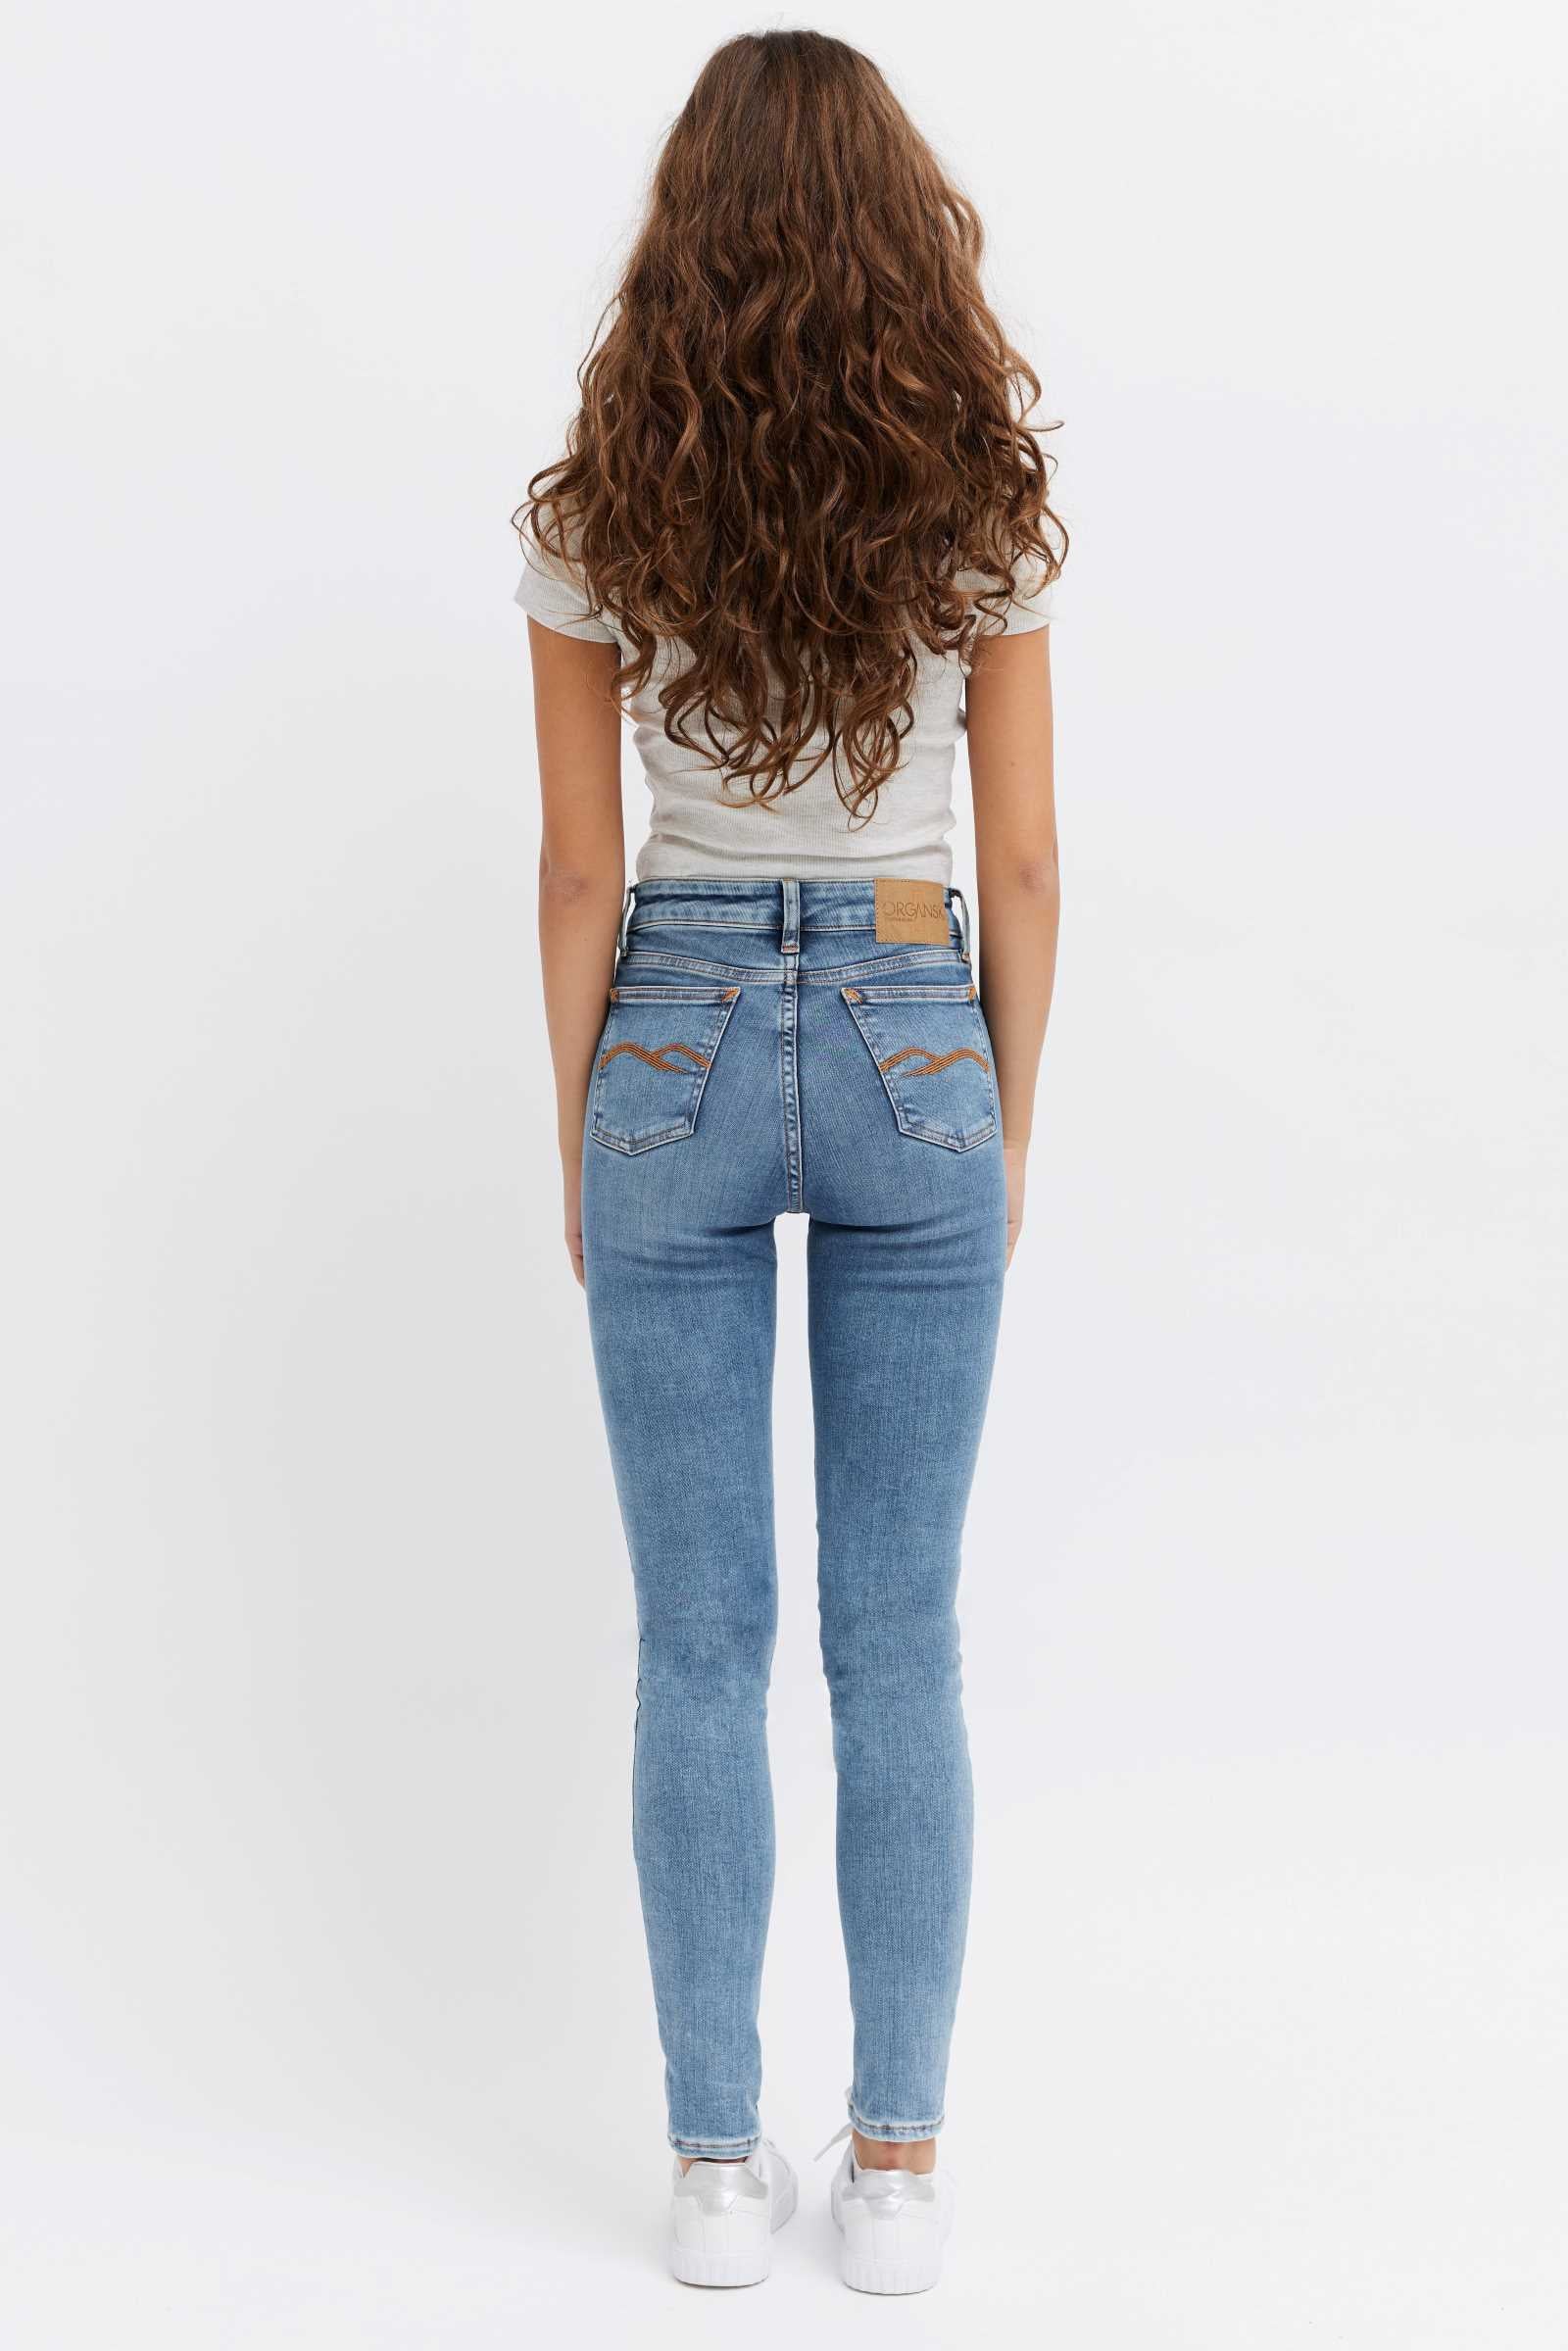 Slim fit jeans women, certified eco-friendly - organic cotton & recycled fibers